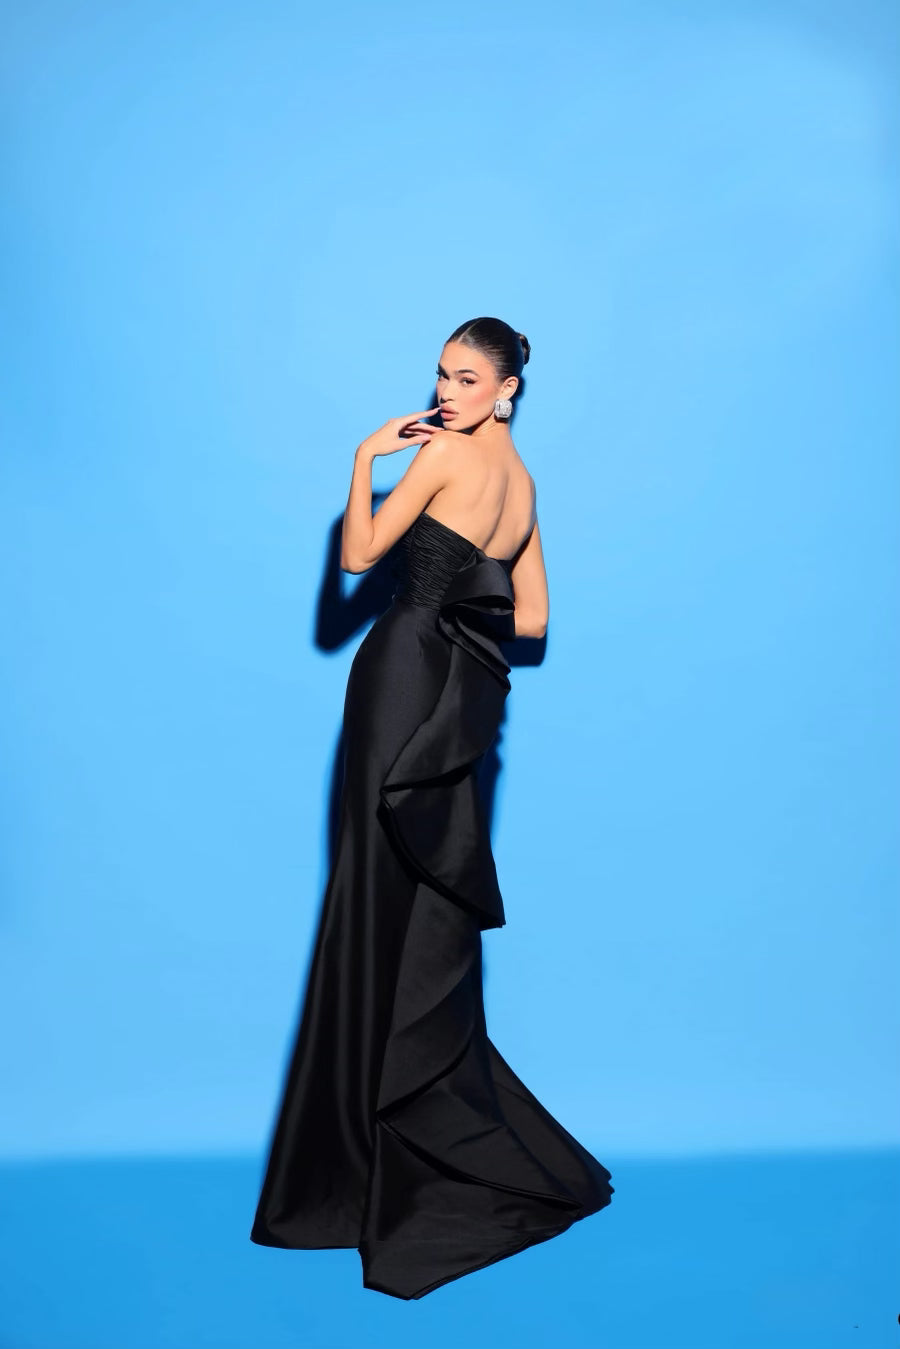 Tarik Ediz 98441 Elegant Strapless Sheath Evening Dress - A timeless strapless evening dress with a straight neckline, sheath silhouette, front slit, and a modern back ruffle detail. Make a statement with elegance and contemporary flair.  The model is wearing the dress in the color black.  This is a view of the back of the dress.